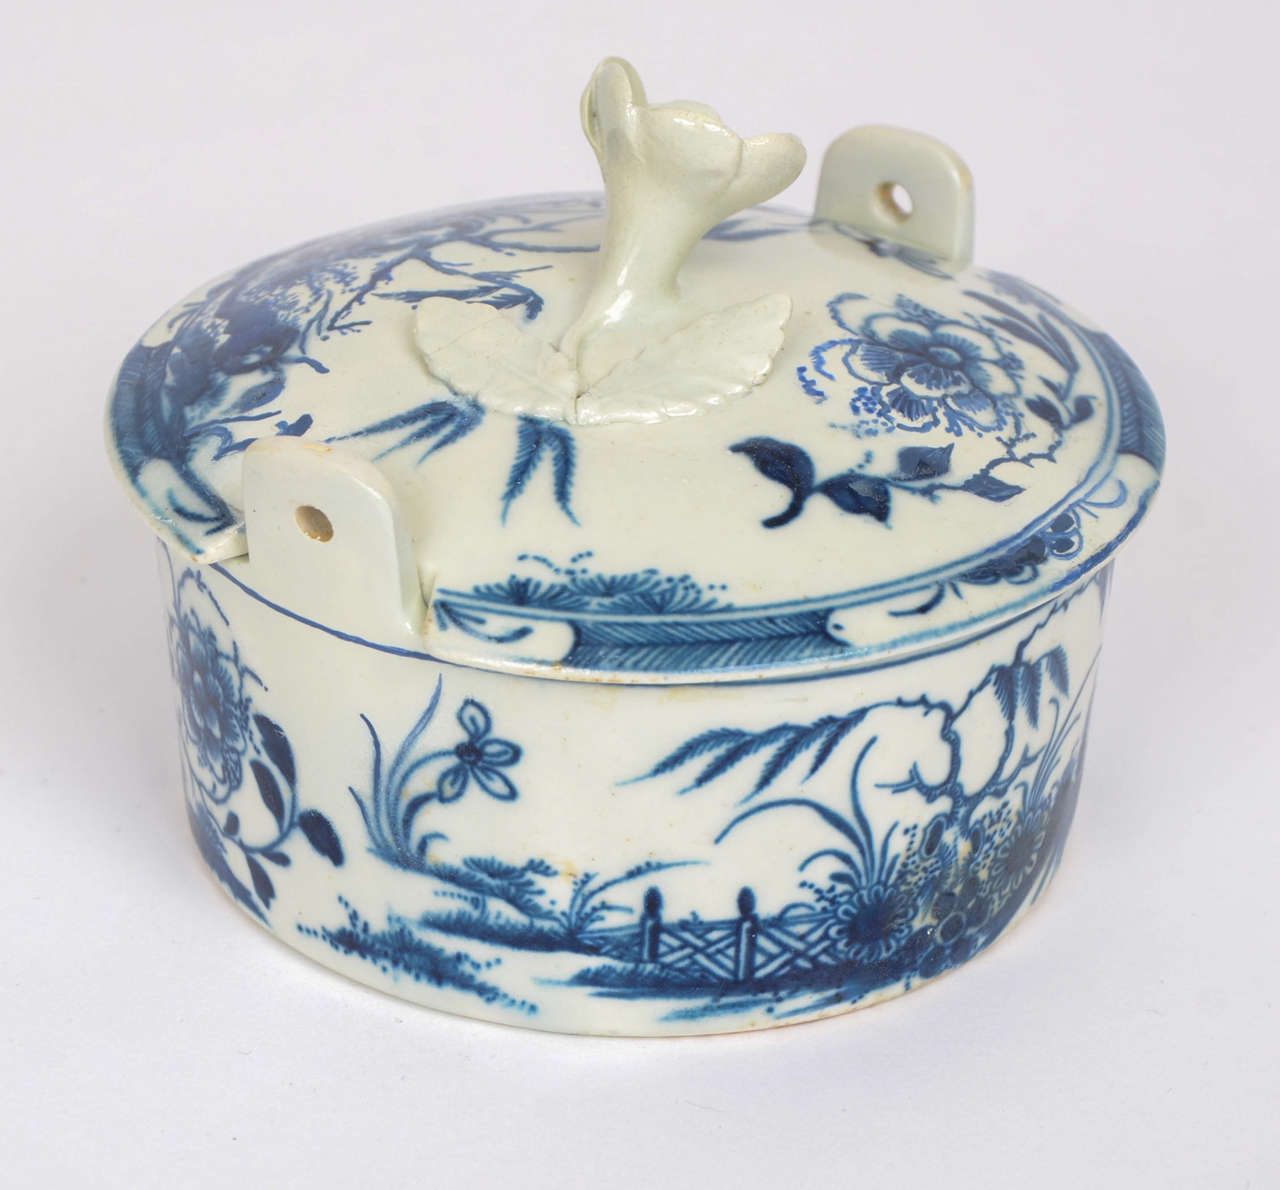 Glazed Rare, First Period, Worcester Blue and White, Porcelain Butter Tub, Fence Pat'n